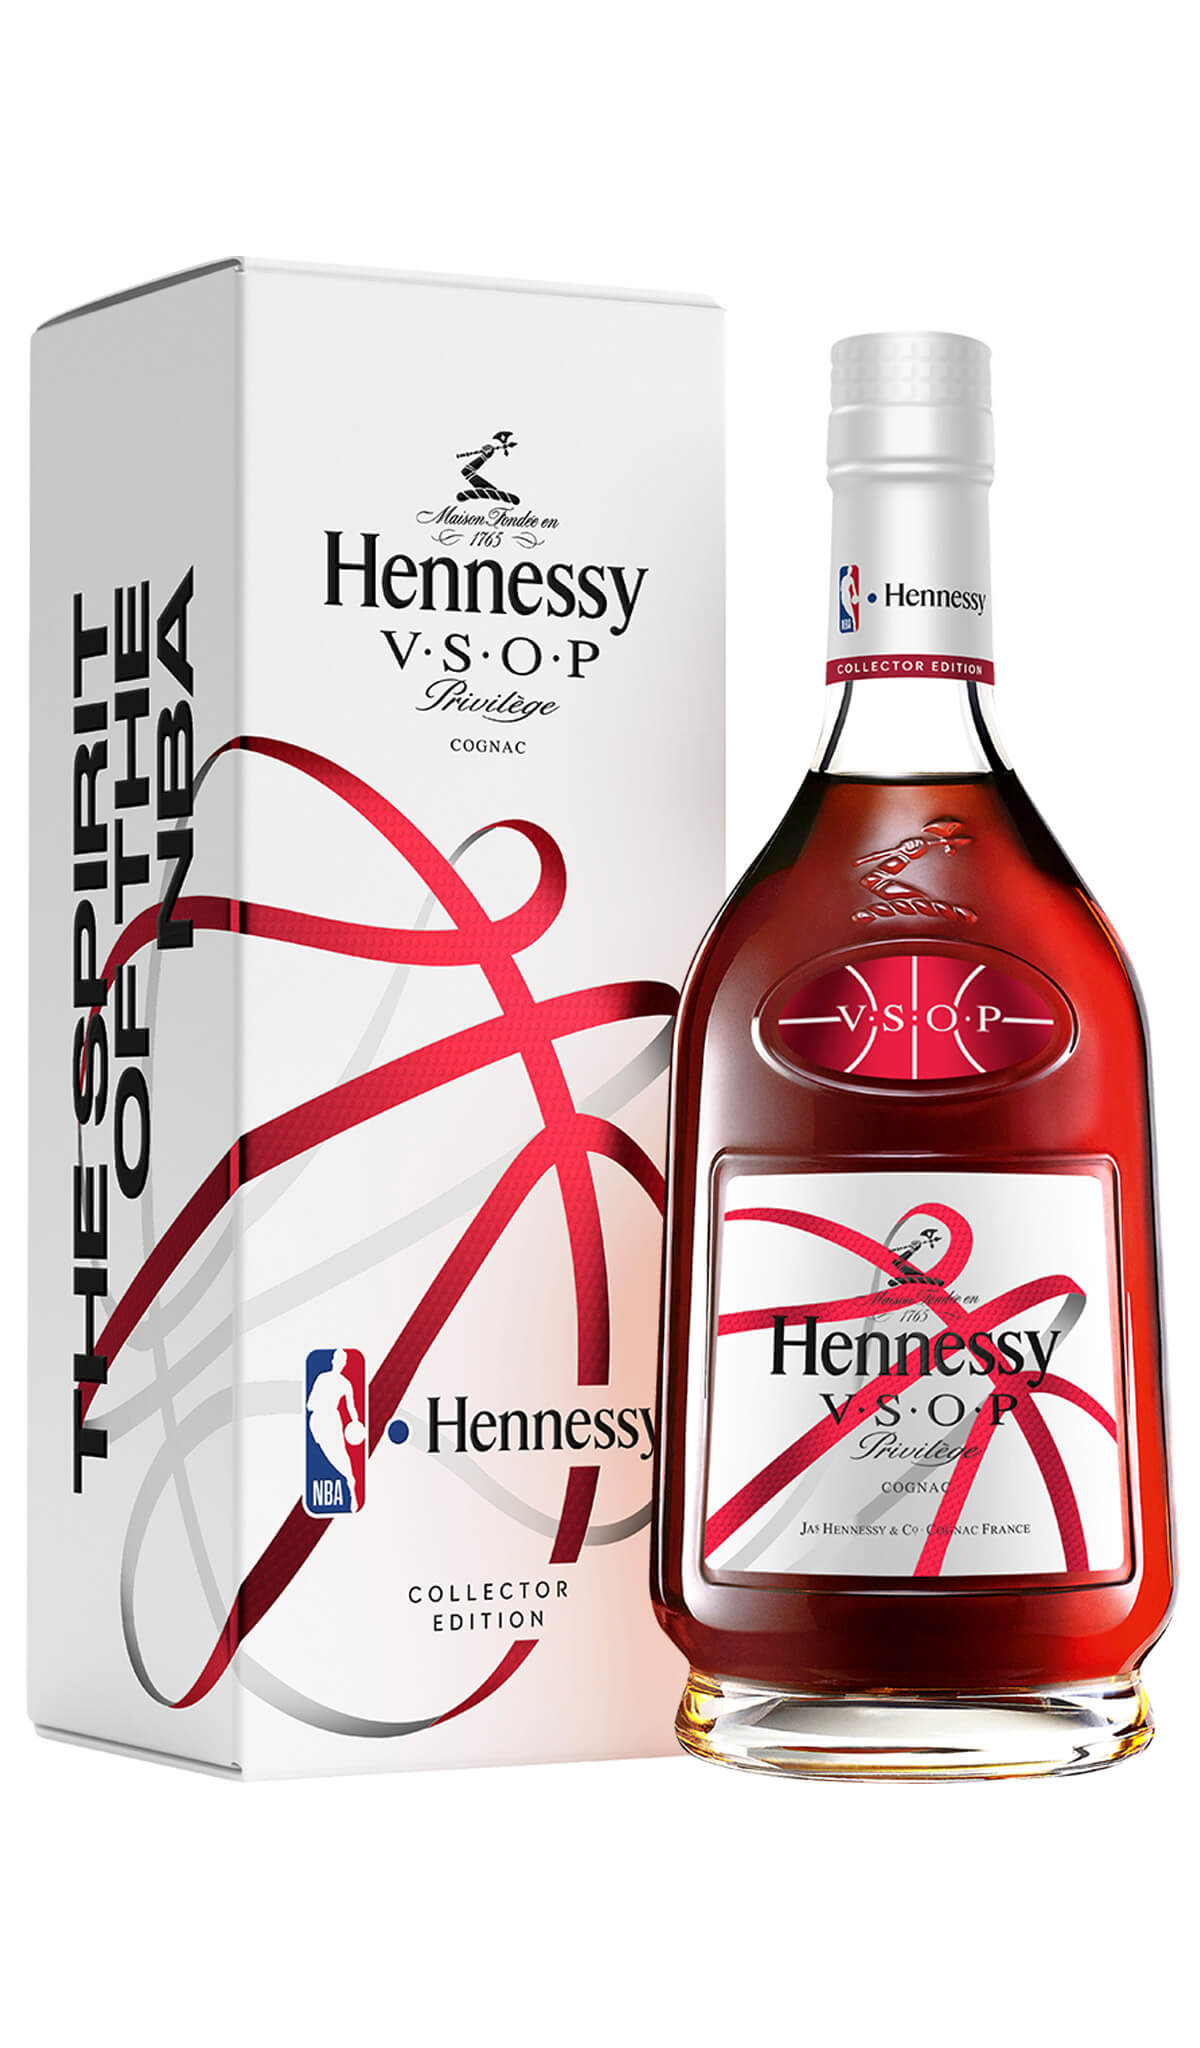 Find out more or buy Hennessy VSOP NBA limited edition Cognac (700ml) online at Wine Sellers Direct - Australia’s independent liquor specialists.